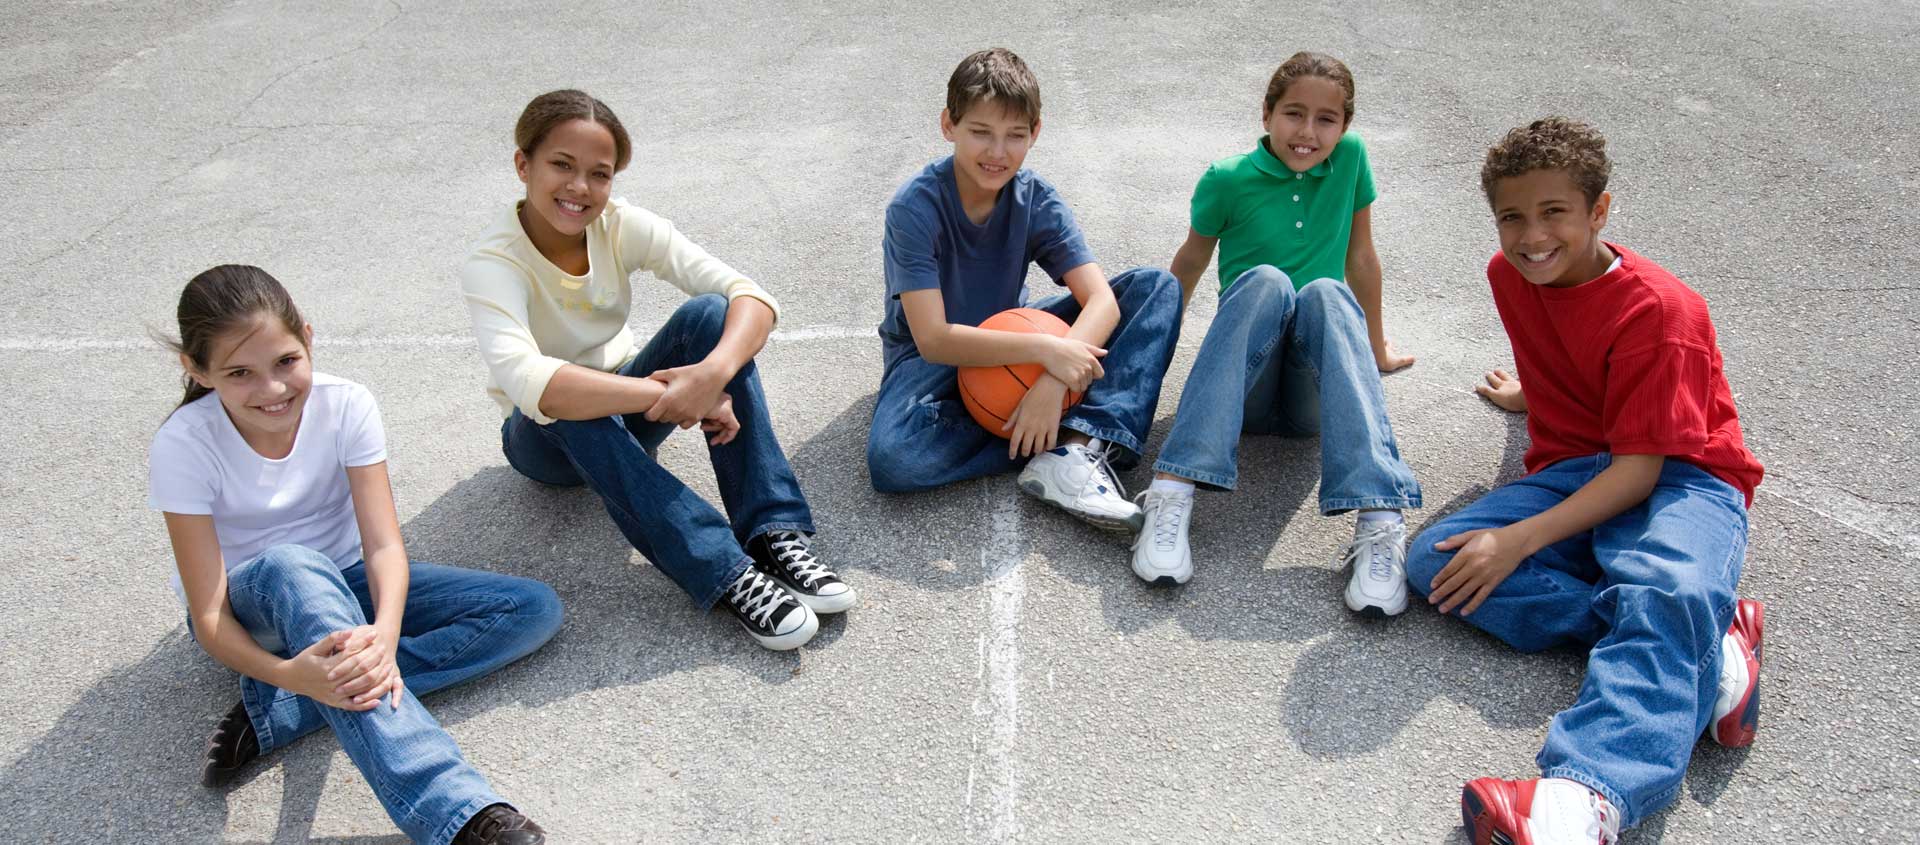 A group of tween firends sits together on a basketball court.